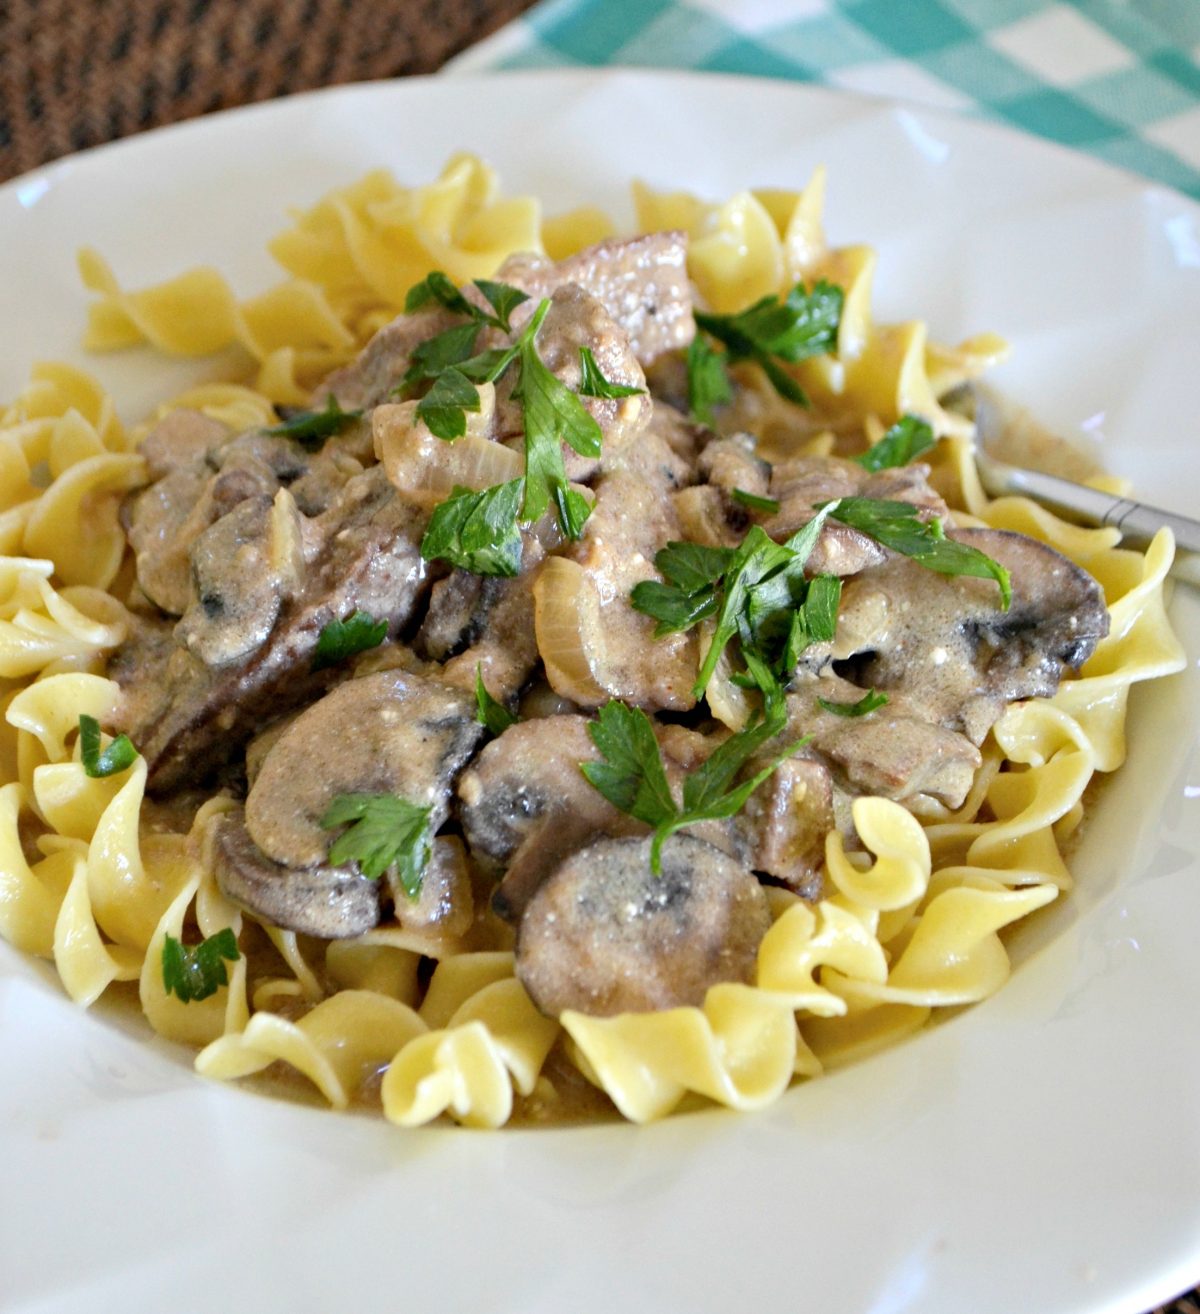 classic beef stroganoff is one of our favorite childhood recipes – plated with parsley